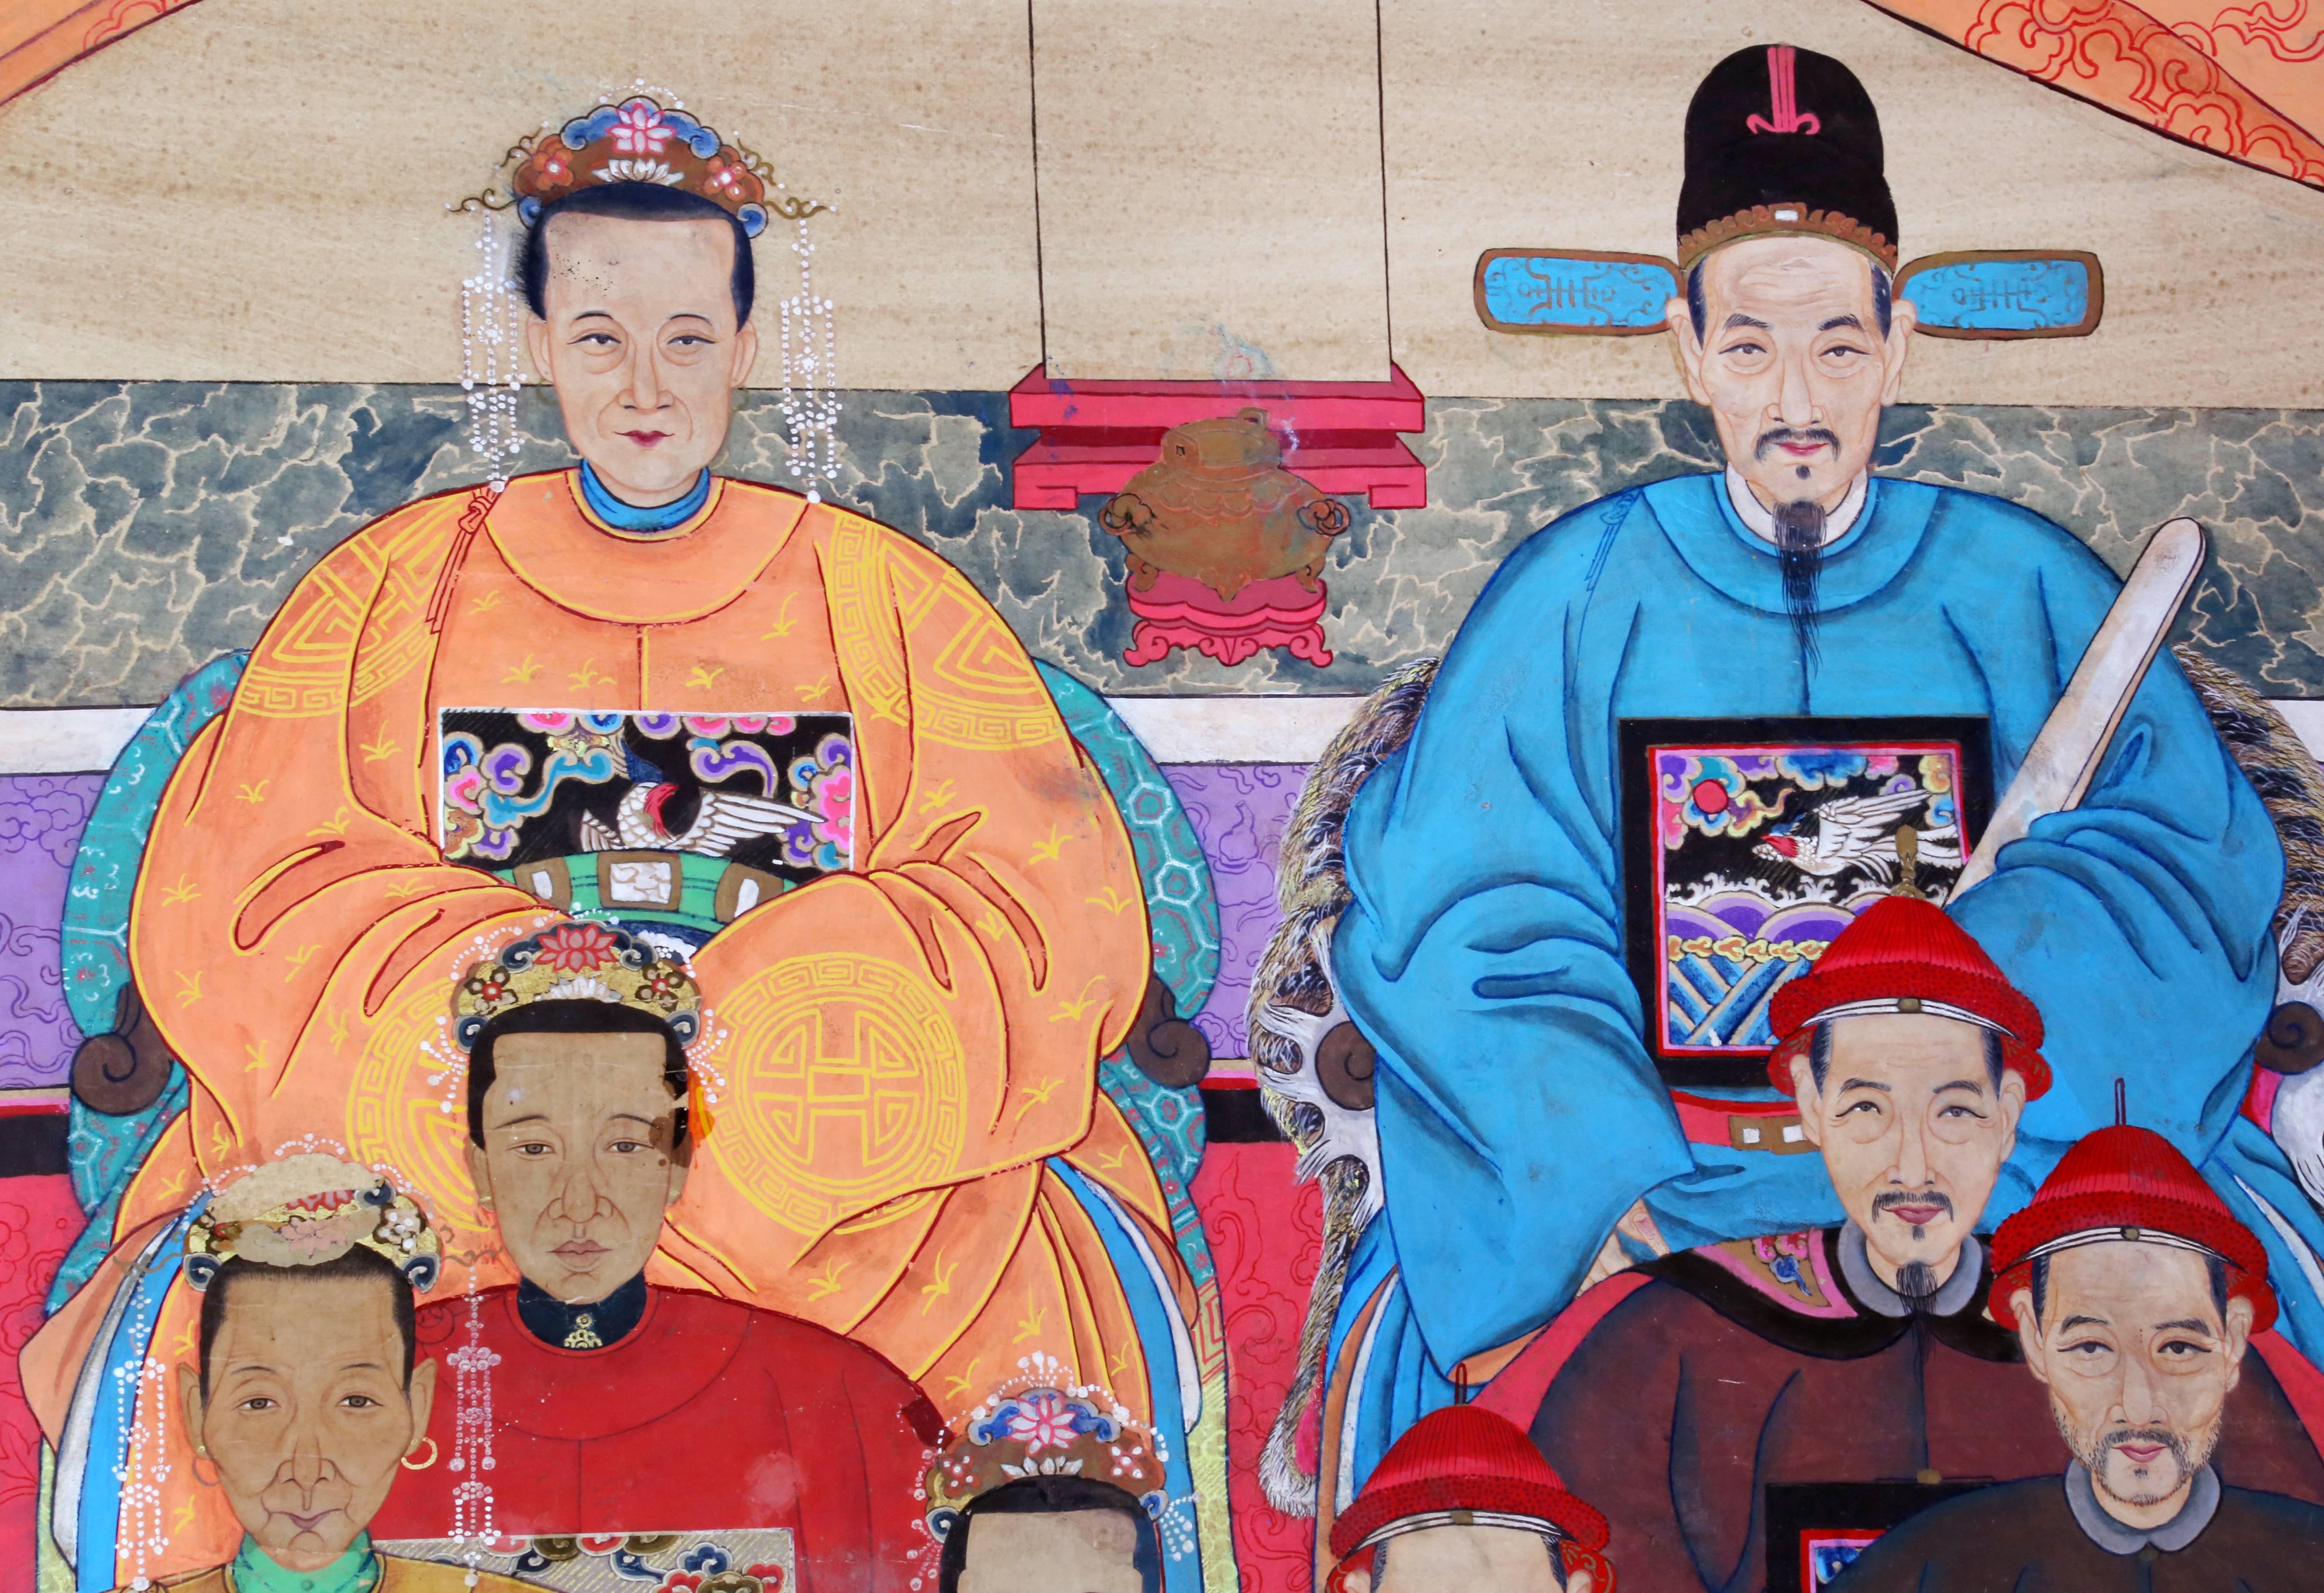 A large, colorful Chinese ancestor portrait, early 19th century, showing multiple generations of the same family seated beneath orange curtains pulled back with blue sashes. Presented in the traditional frontal pose, this painting on rice paper